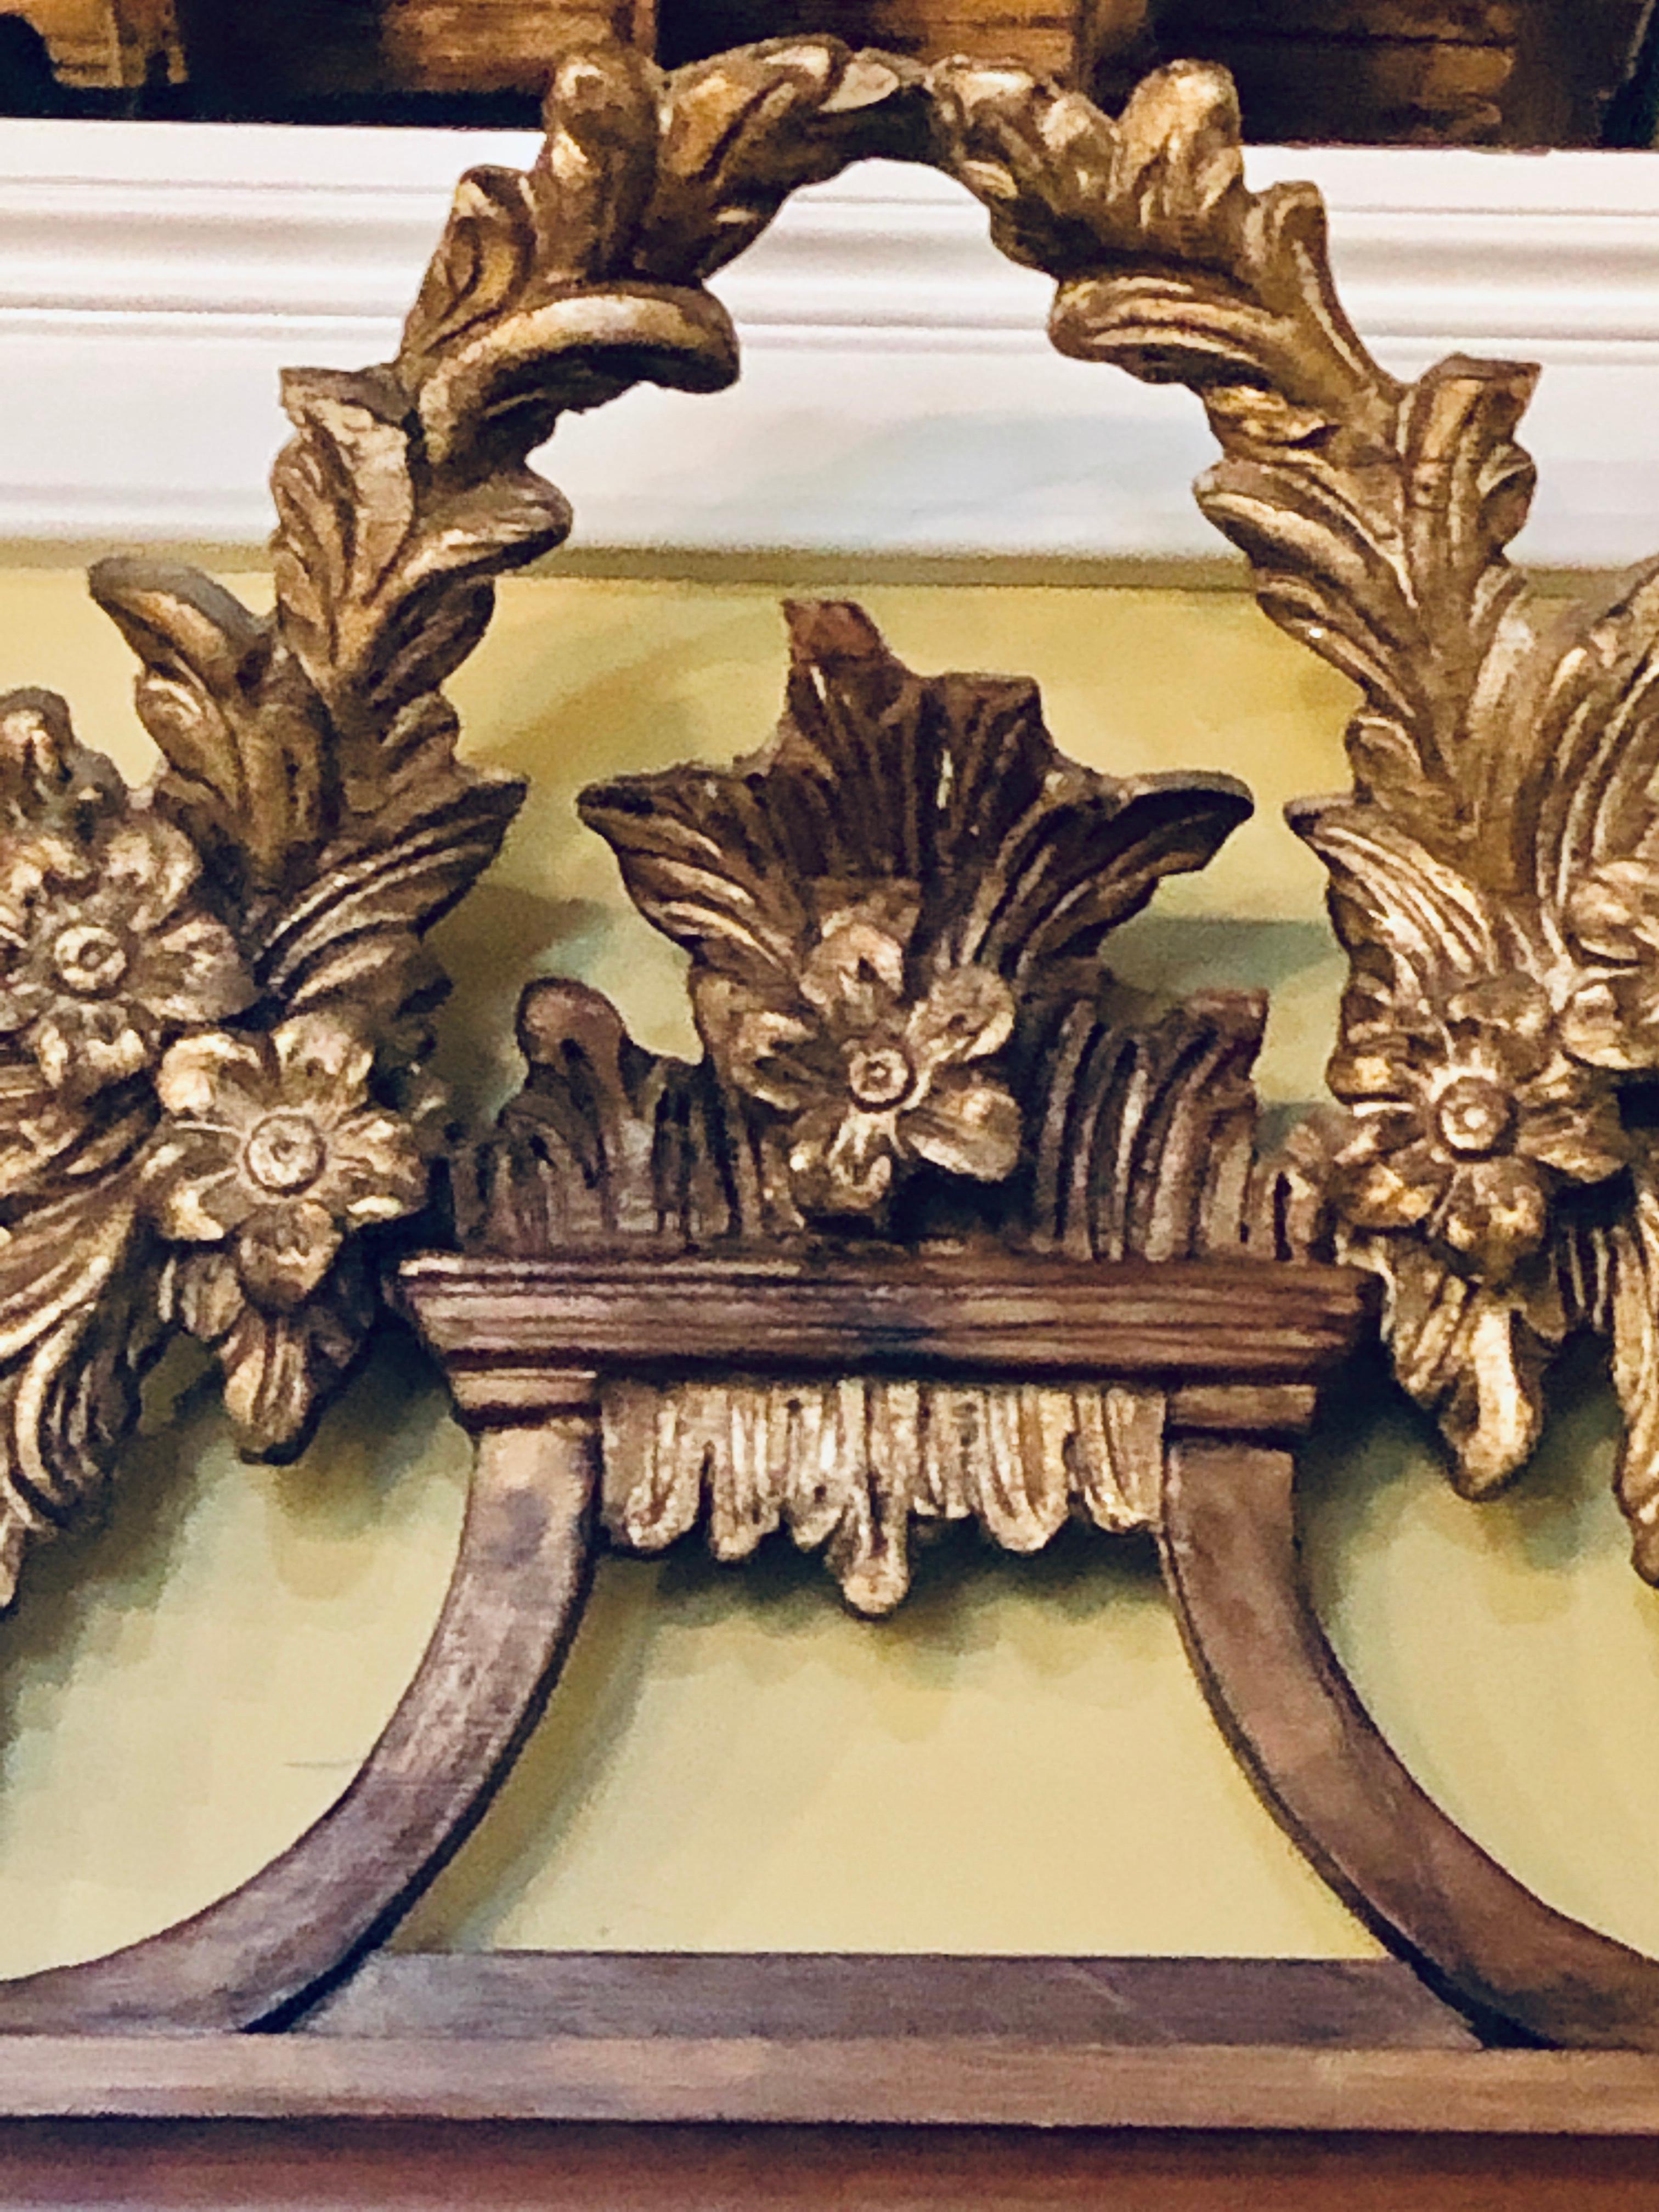 A Gilt Gold Italian Acanthus Leaf Carved Wall or Console Mirror. A wonderfully carved and detailed wall mirror with a beveled mirror framed by a serious group of carvings.